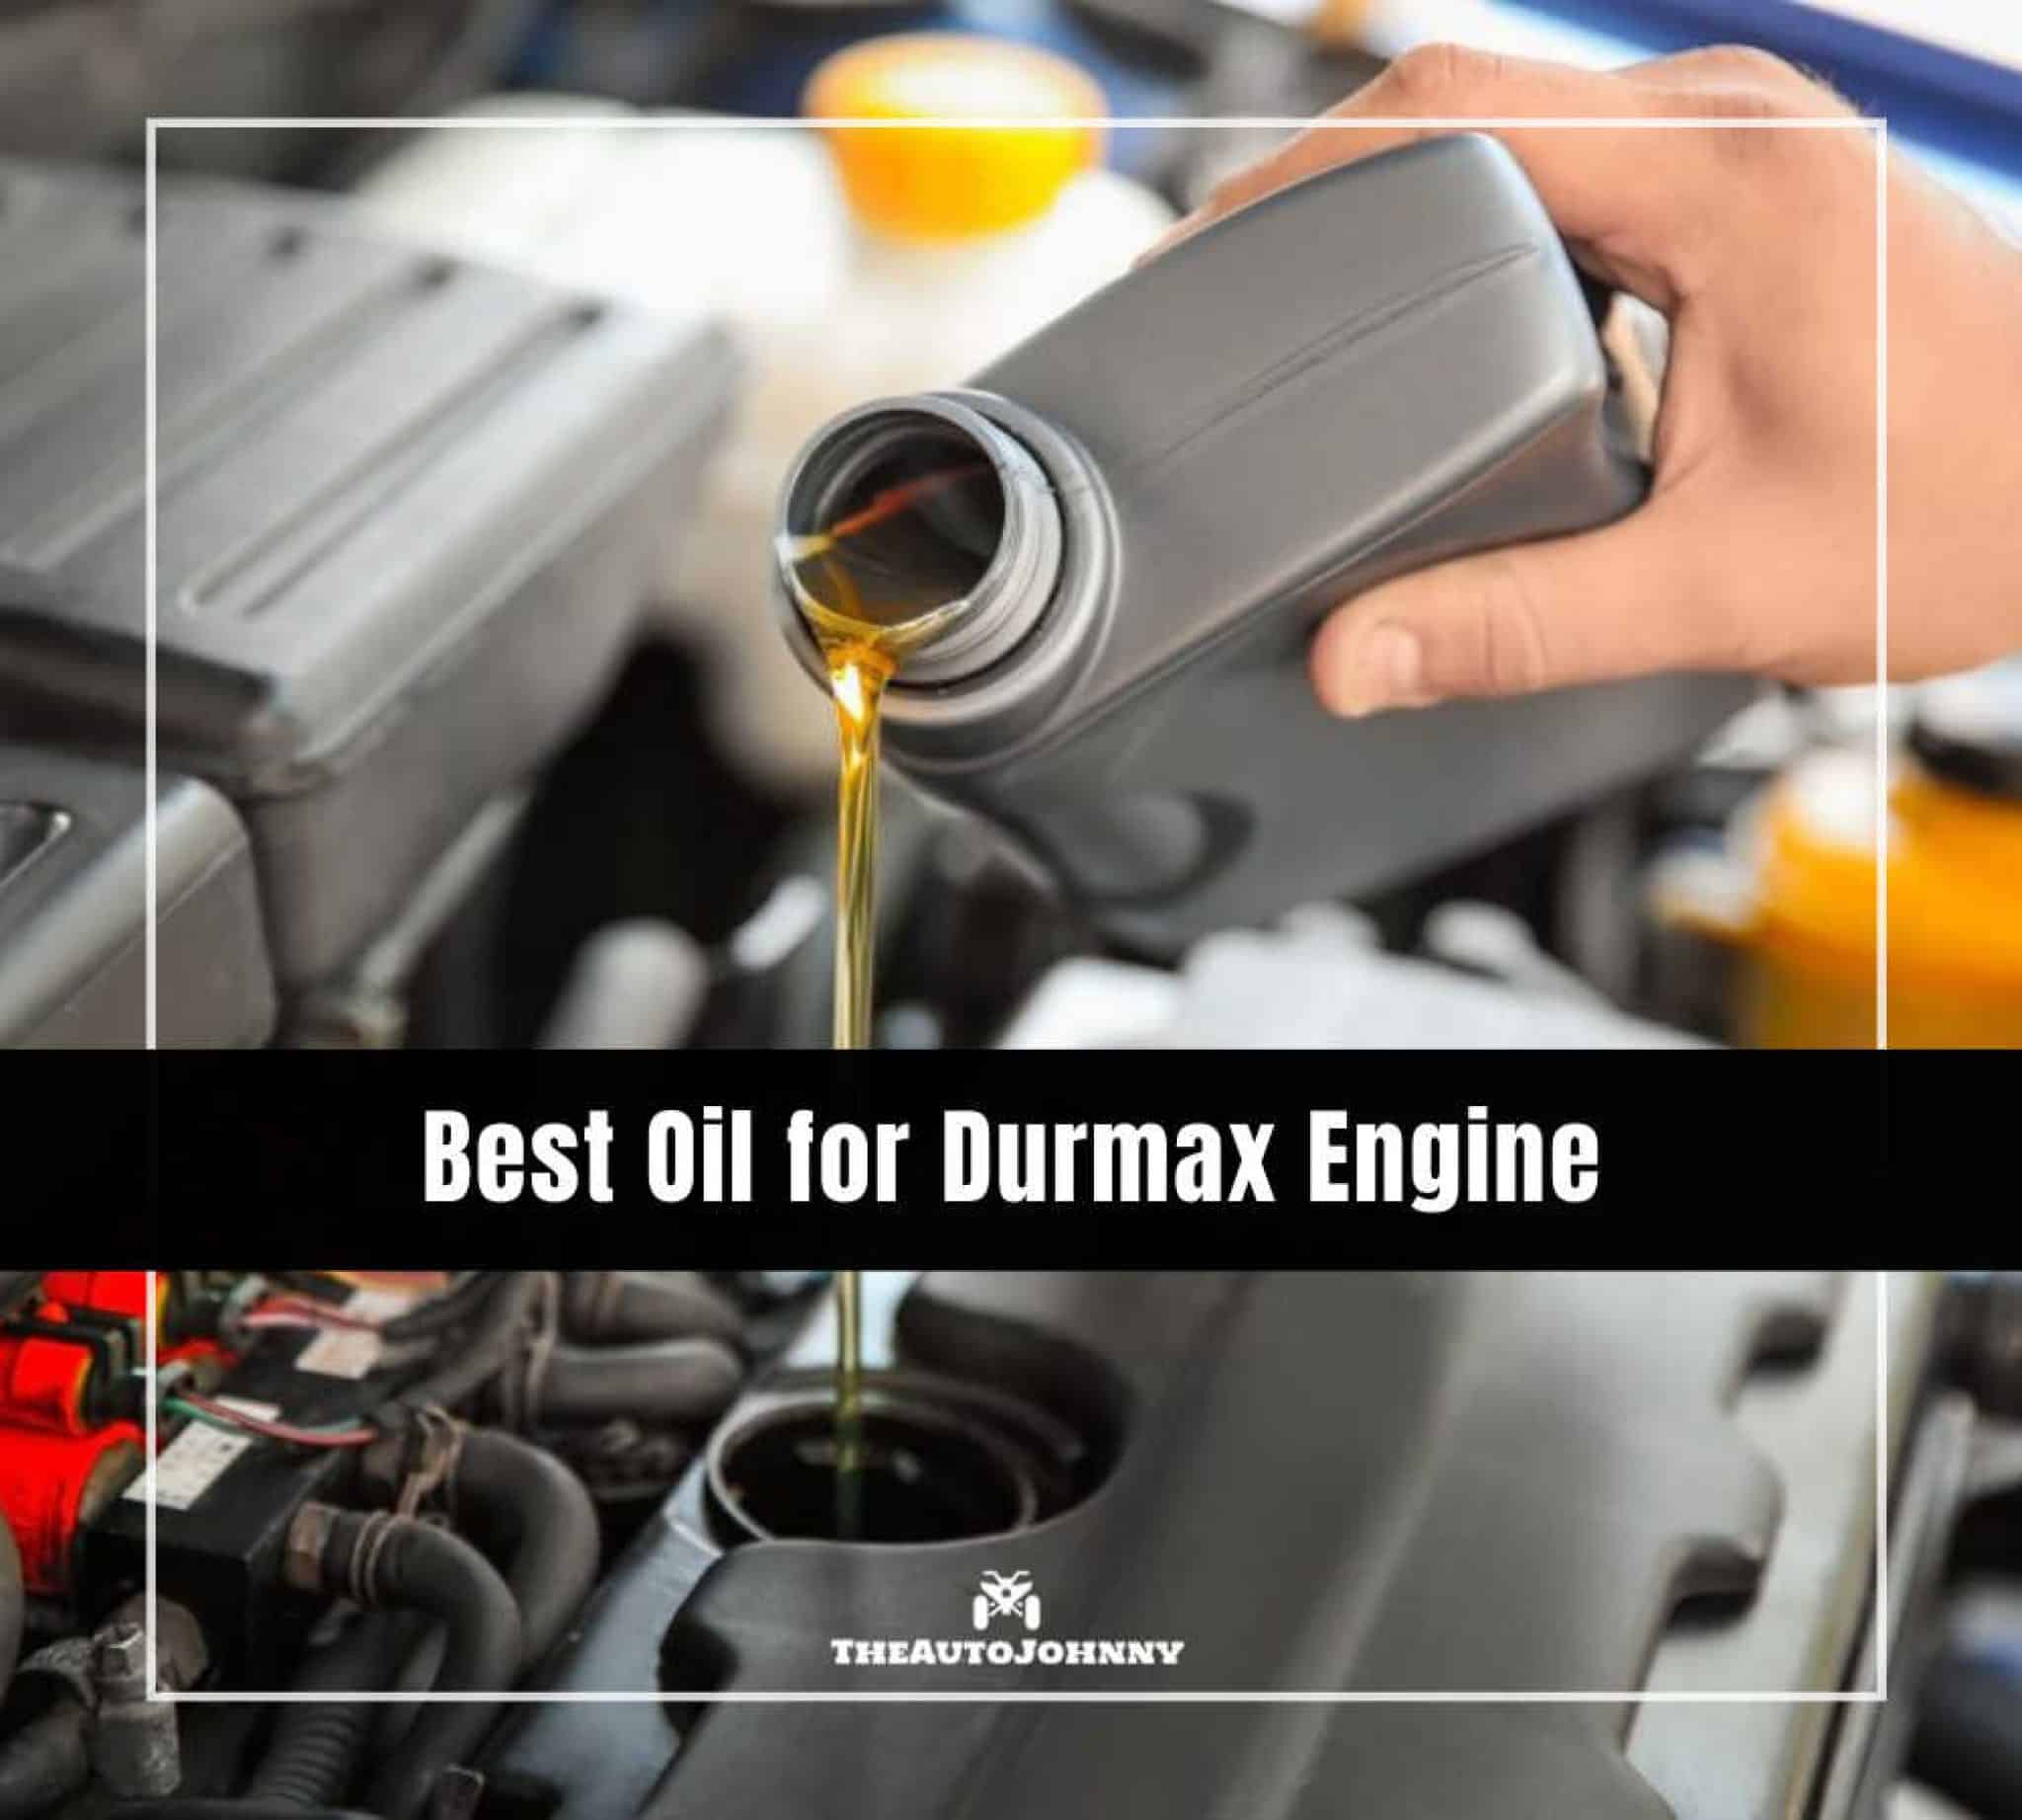 6-best-oil-for-duramax-engine-reviews-buying-guide-the-auto-johnny